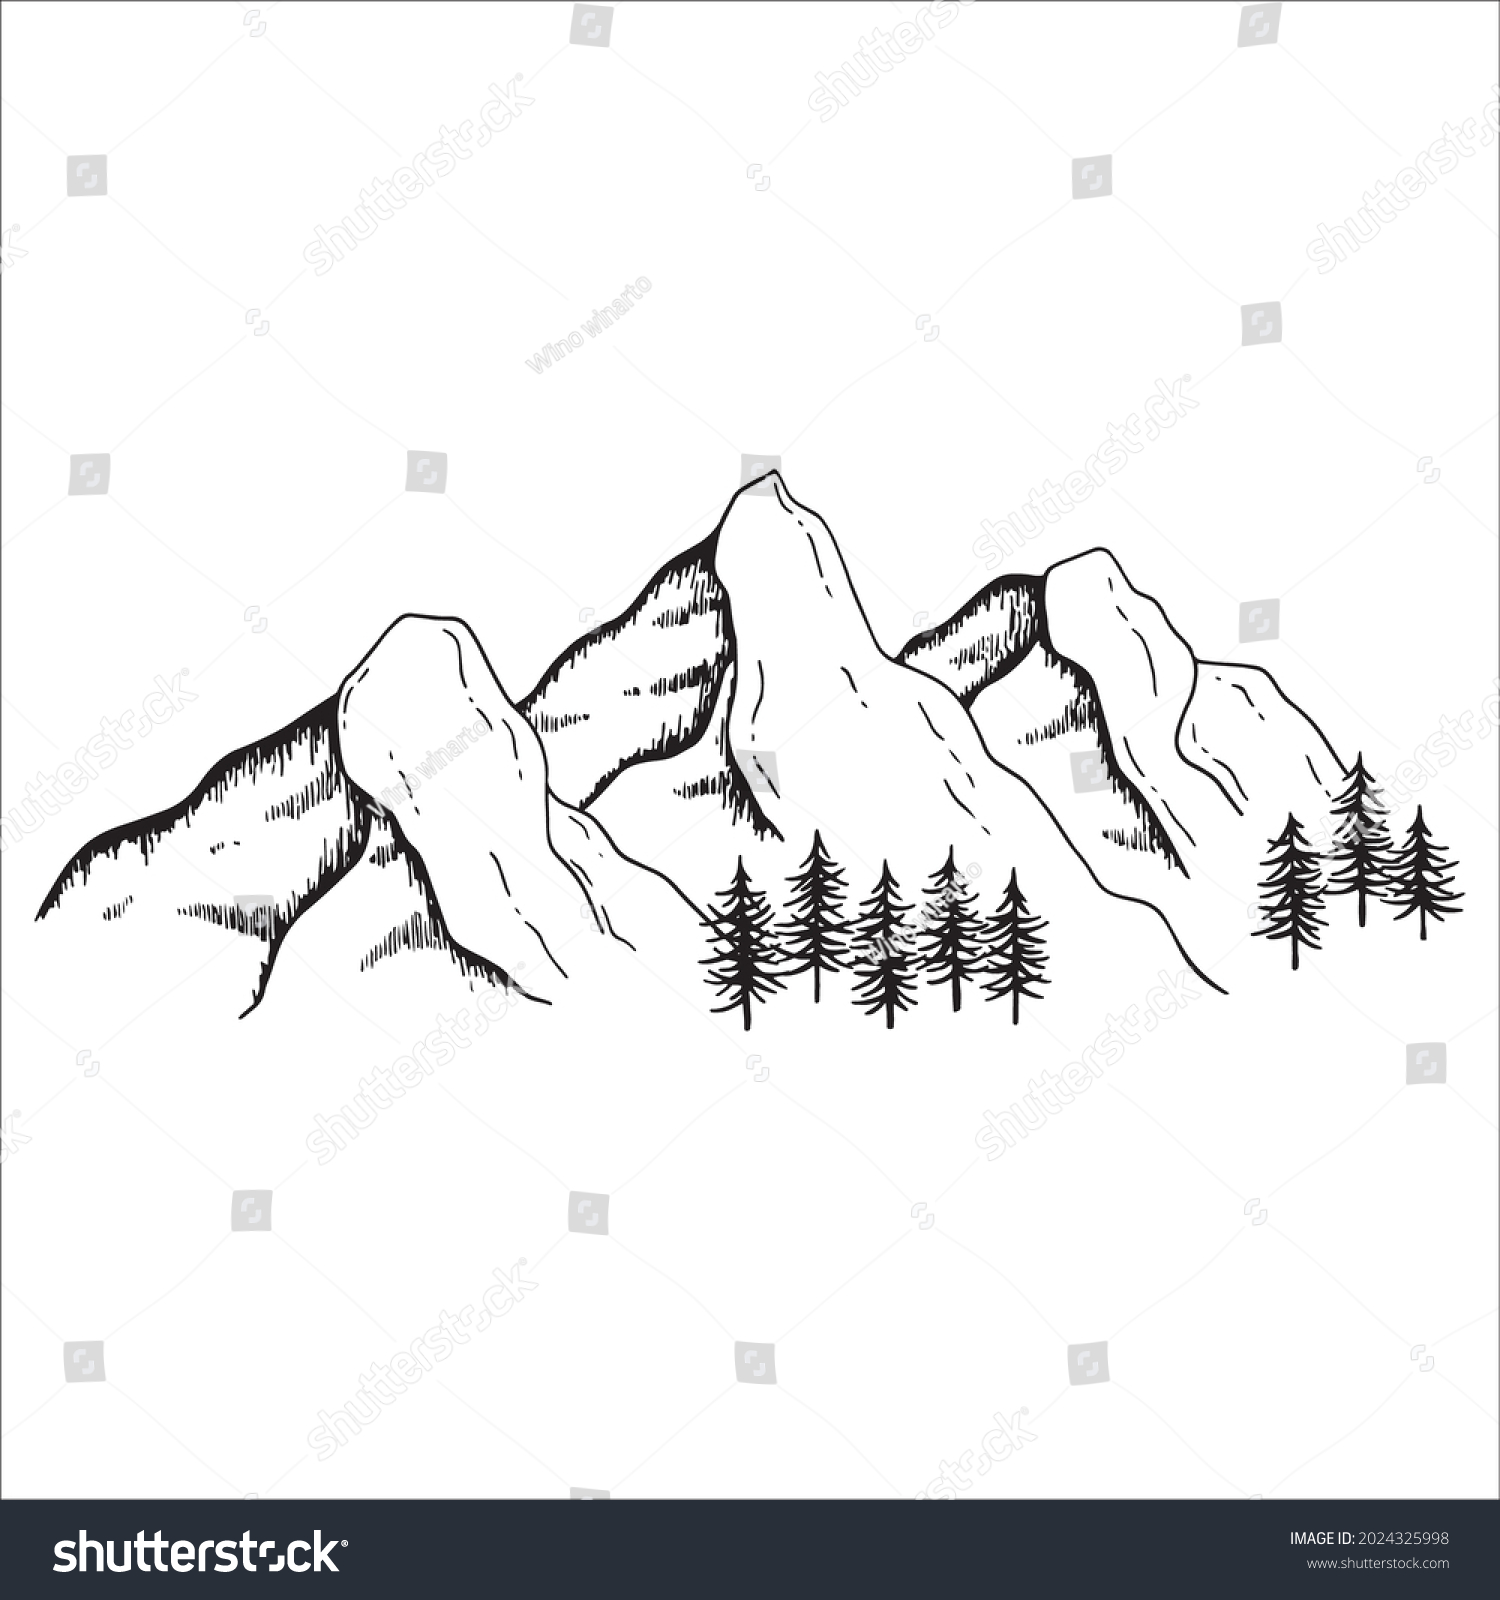 Mountain Scenery Drawing Vector Design Stock Vector (Royalty Free ...